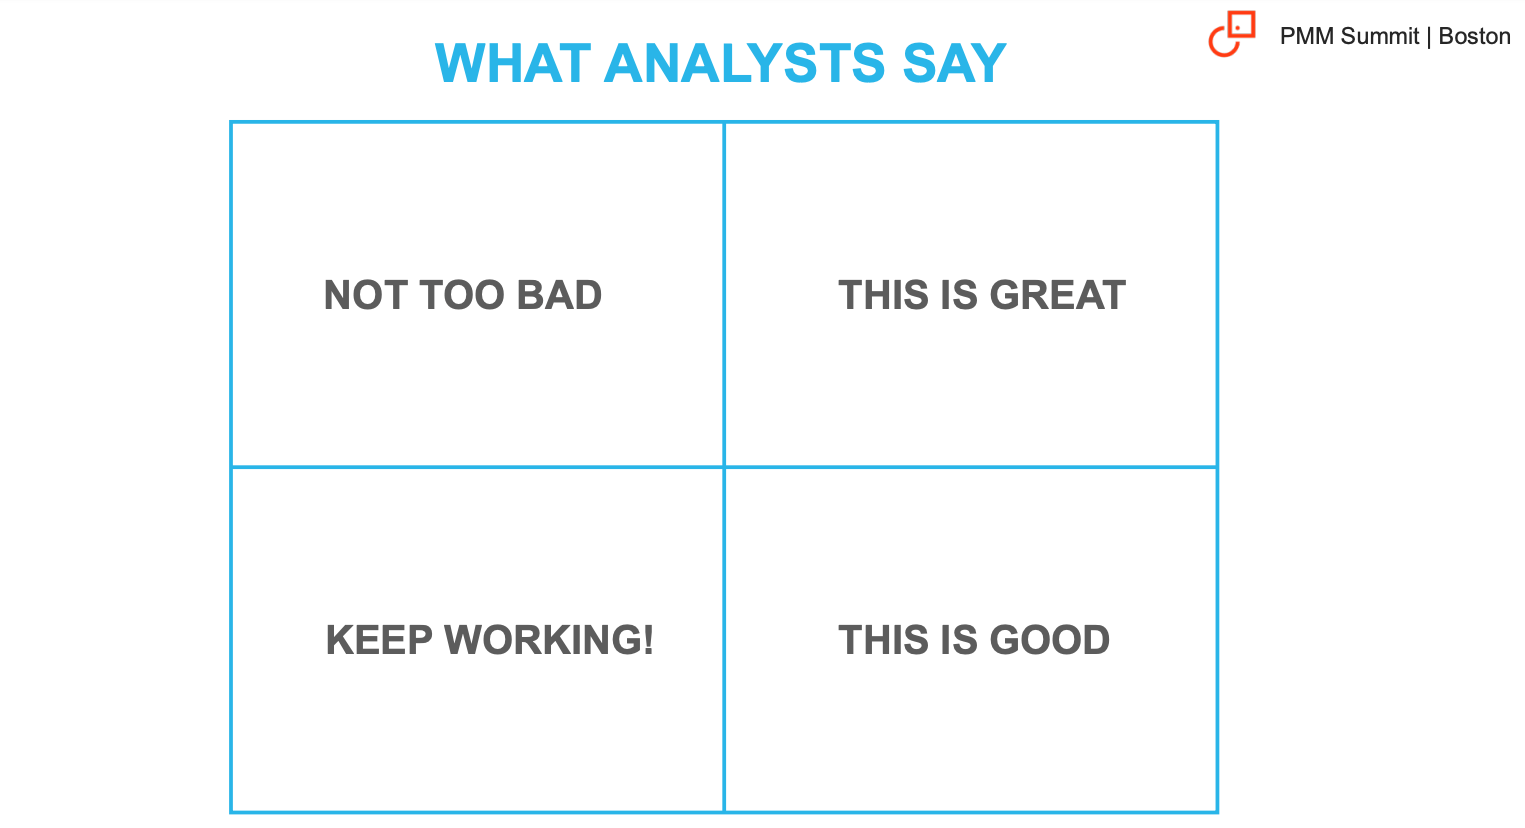 A graph depicting alleged, typical analysts responses to scenarios.